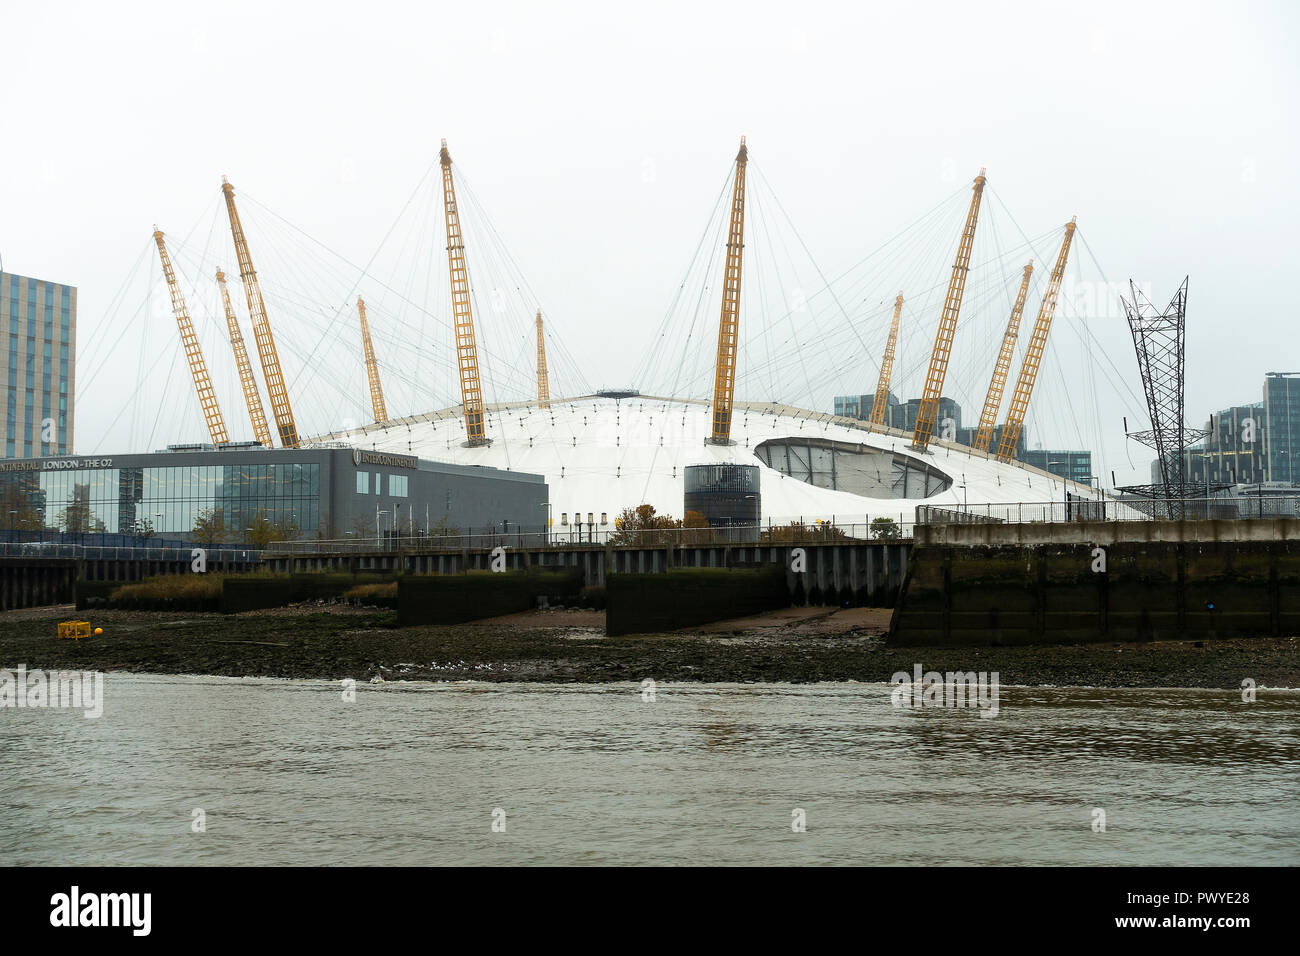 The Millennium Dome now known as The O2 Arena on the Bank of the River Thames on the Greenwich Peninsula South East London United Kingdom UK Stock Photo